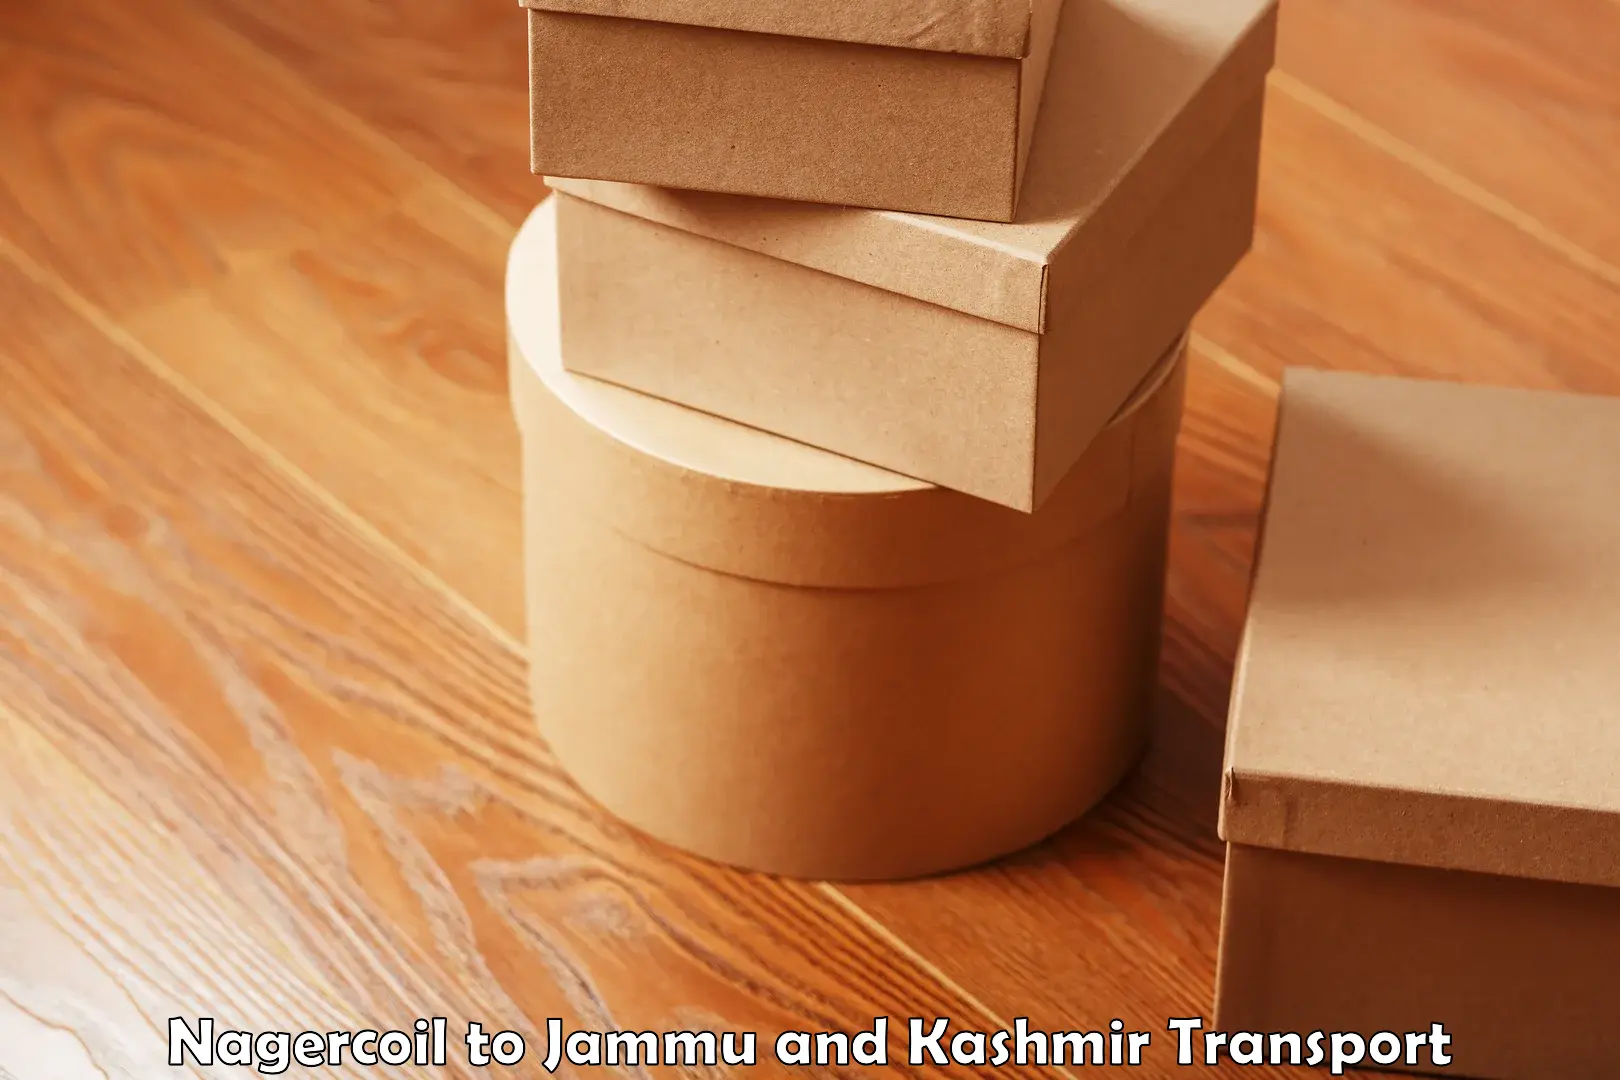 Lorry transport service Nagercoil to Jammu and Kashmir